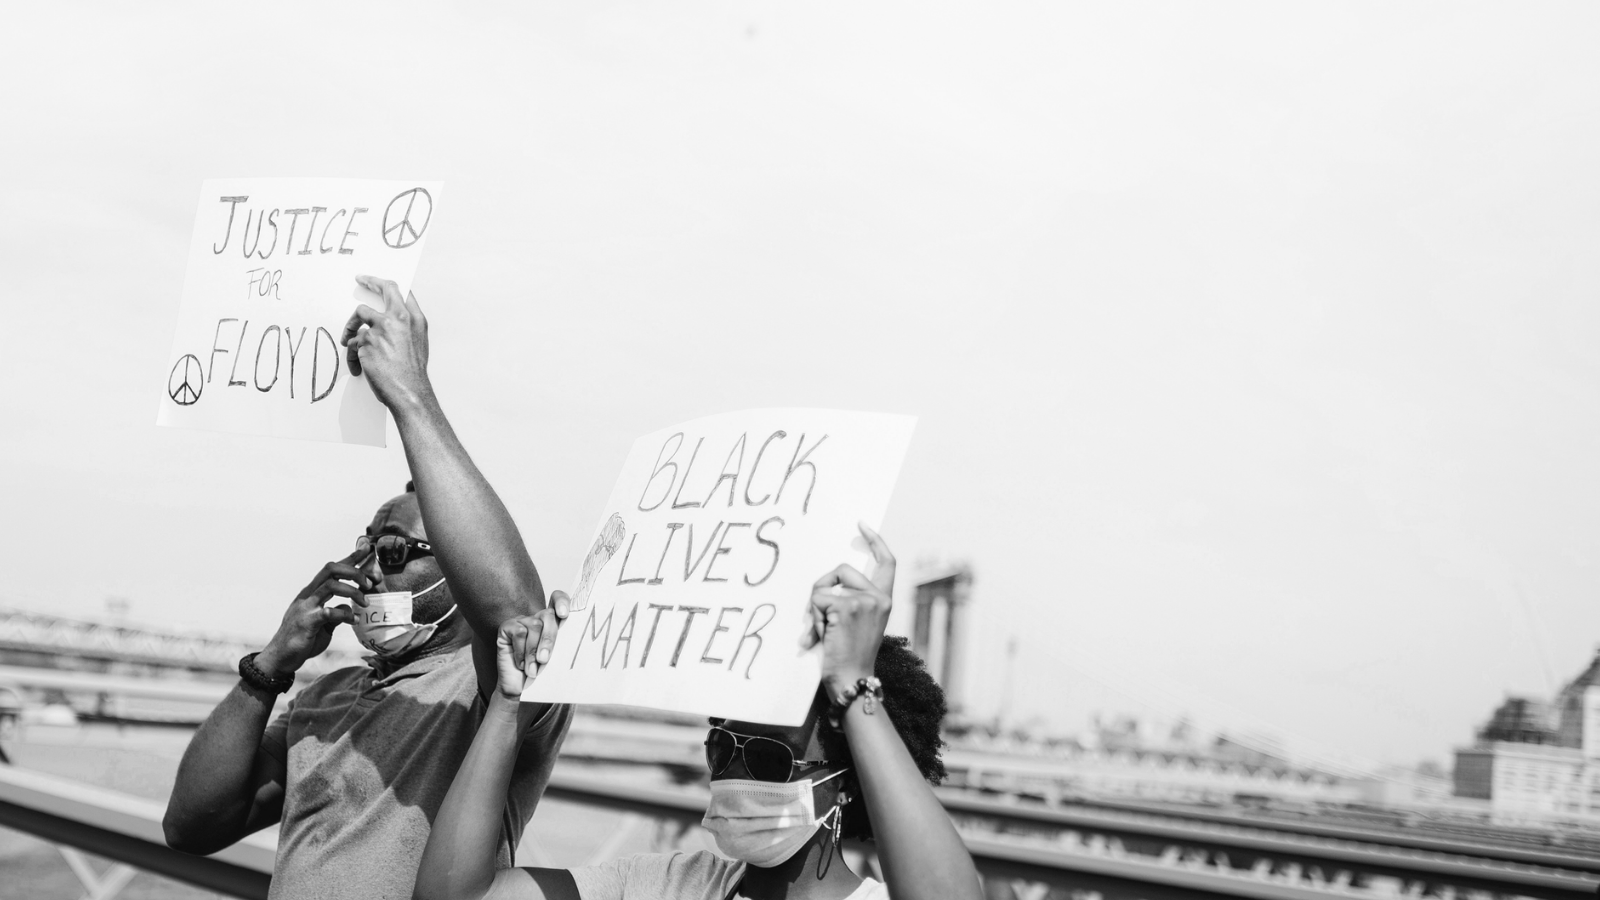 The Movement for Black Lives Announces Support for The People’s Response Act